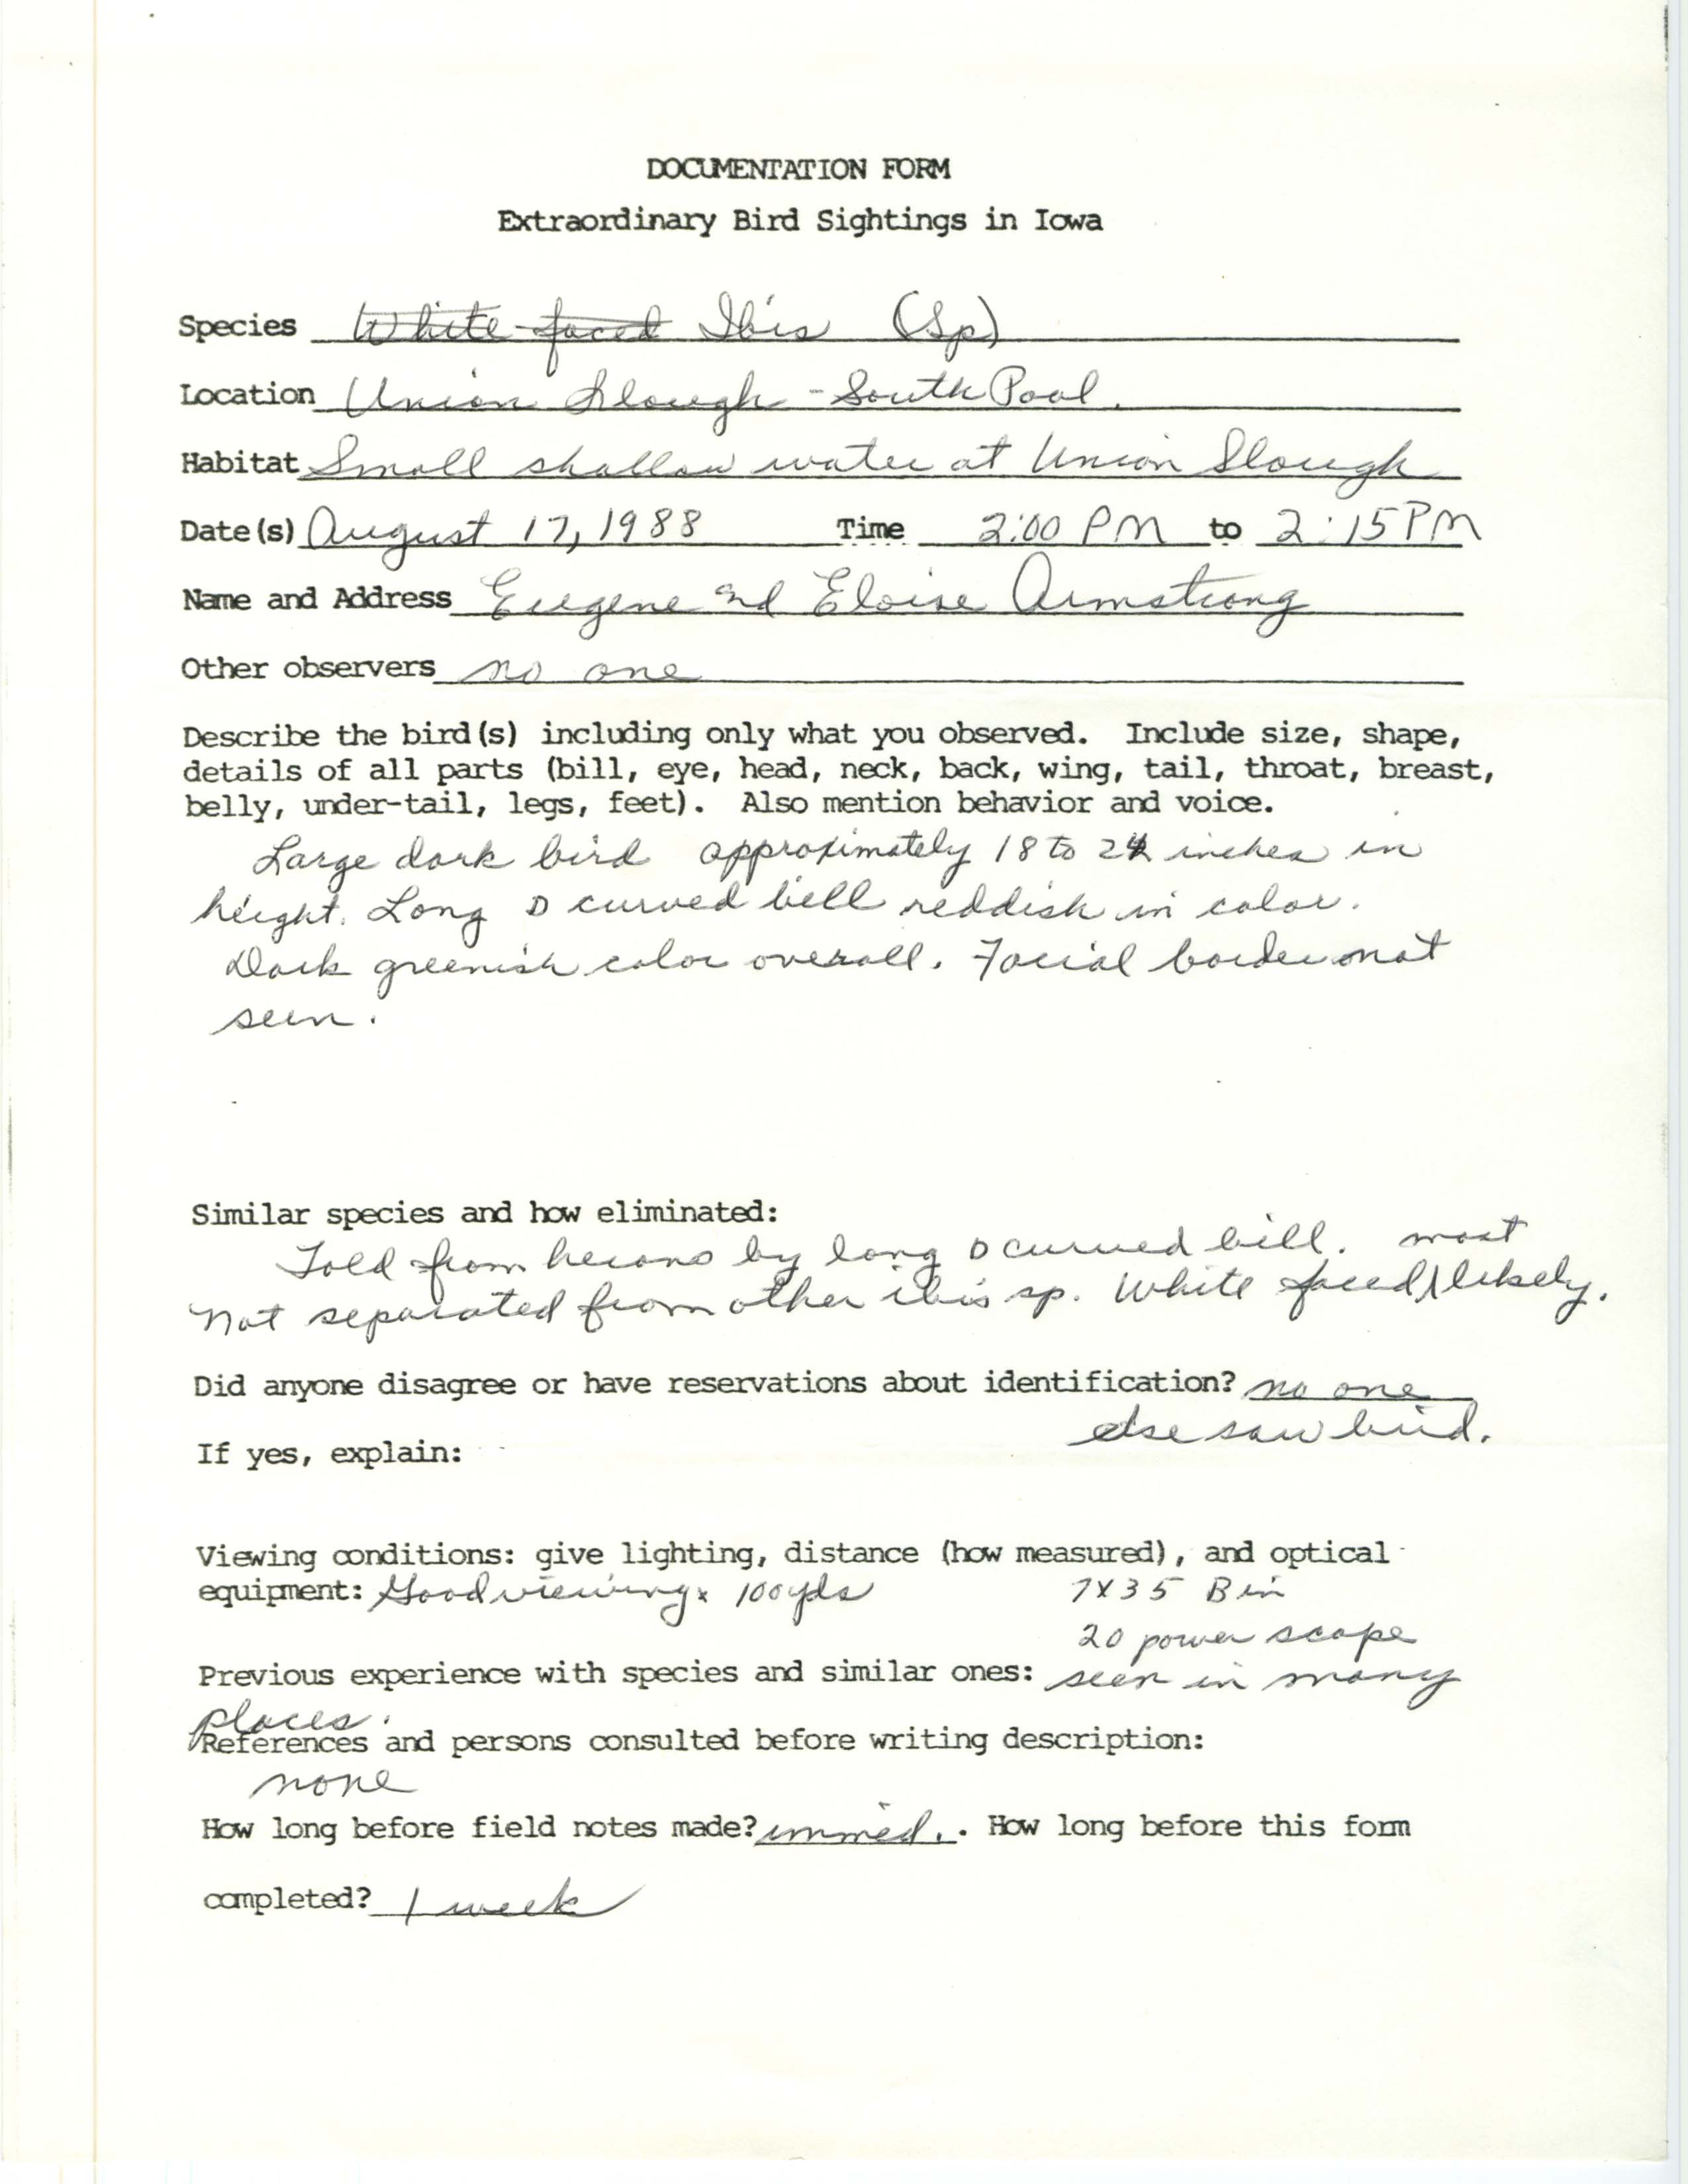 Rare bird documentation form for Ibis species at Union Slough, 1988